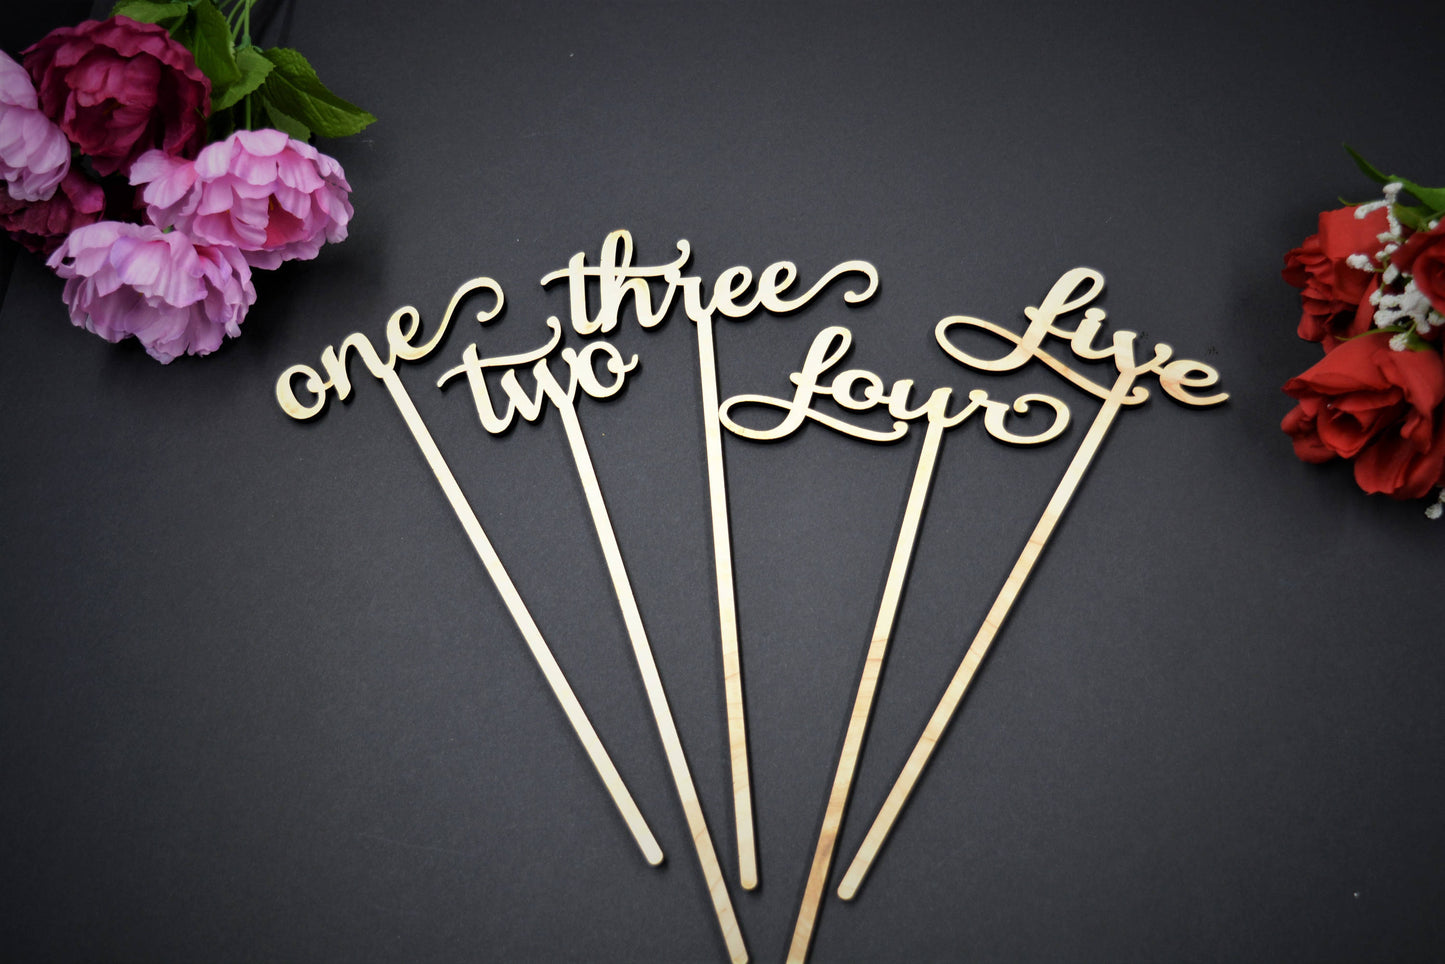 Gold Glitter Wedding Table Numbers with attached stakes